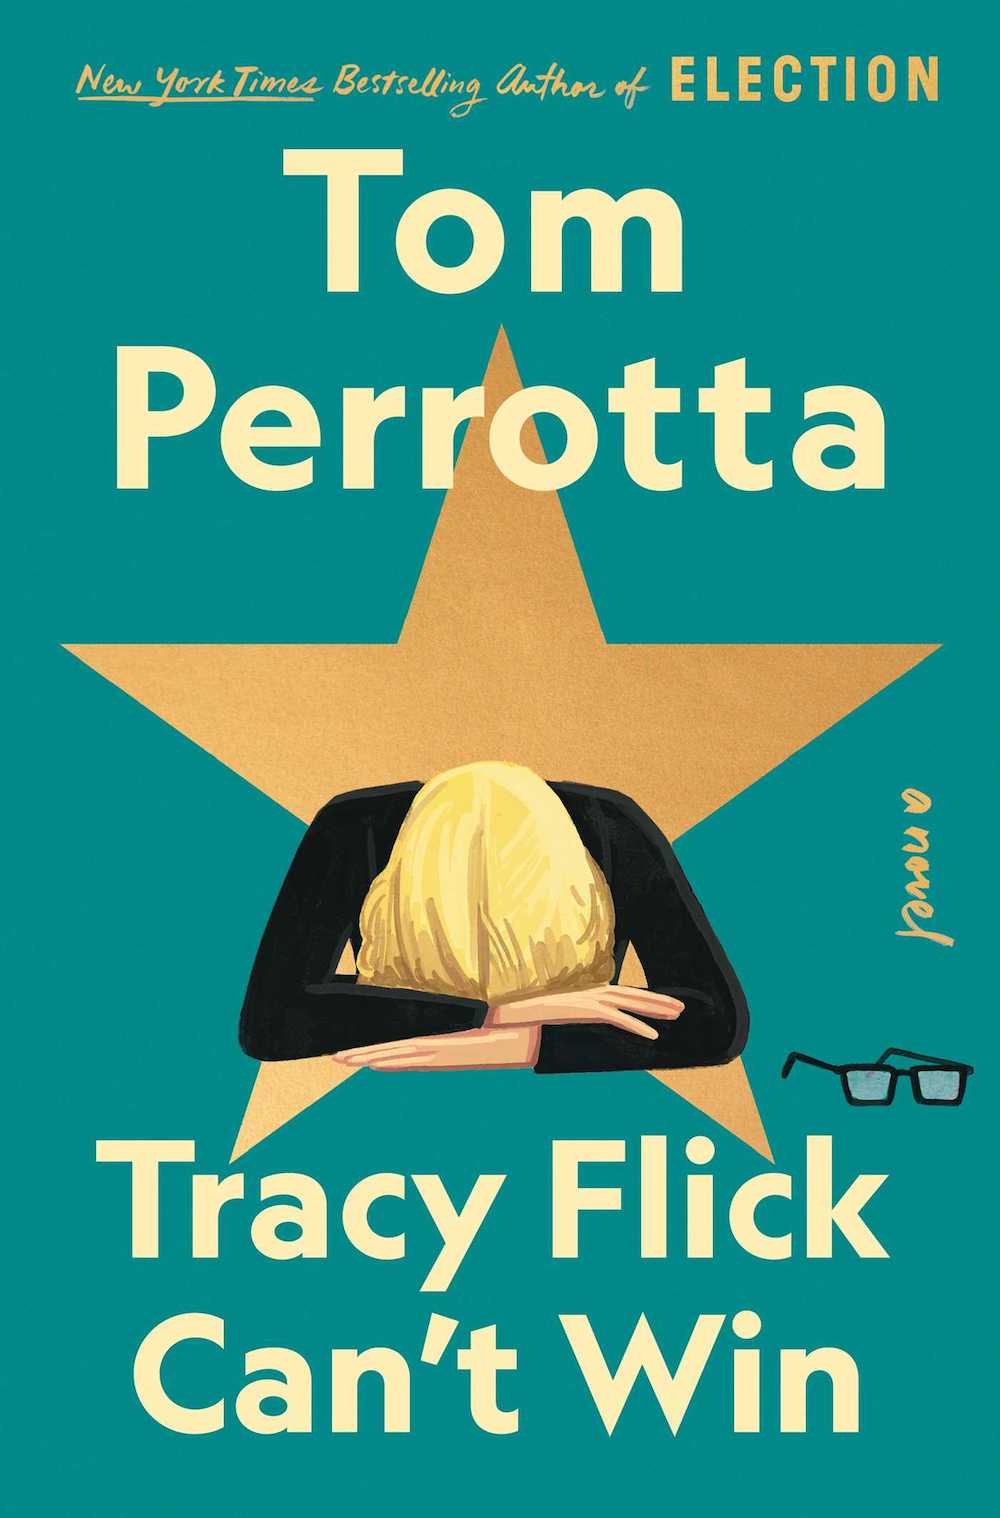 The cover of Spring 2022 book, Tracy Flick Can't Win, depicting an illustration of a woman with her head buried in her forearms, glasses by her side